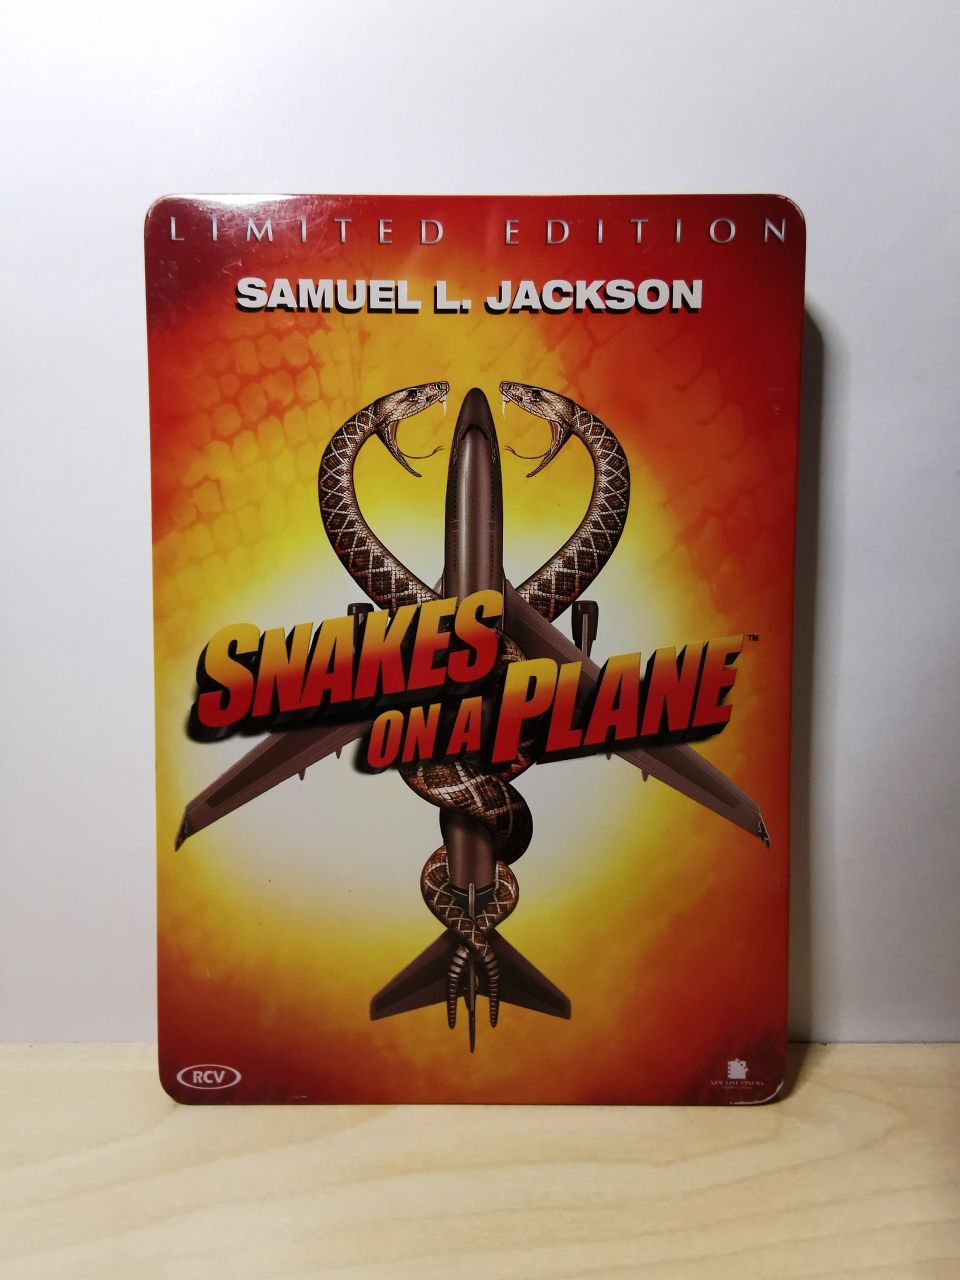 Steelbook Snakes on a plane